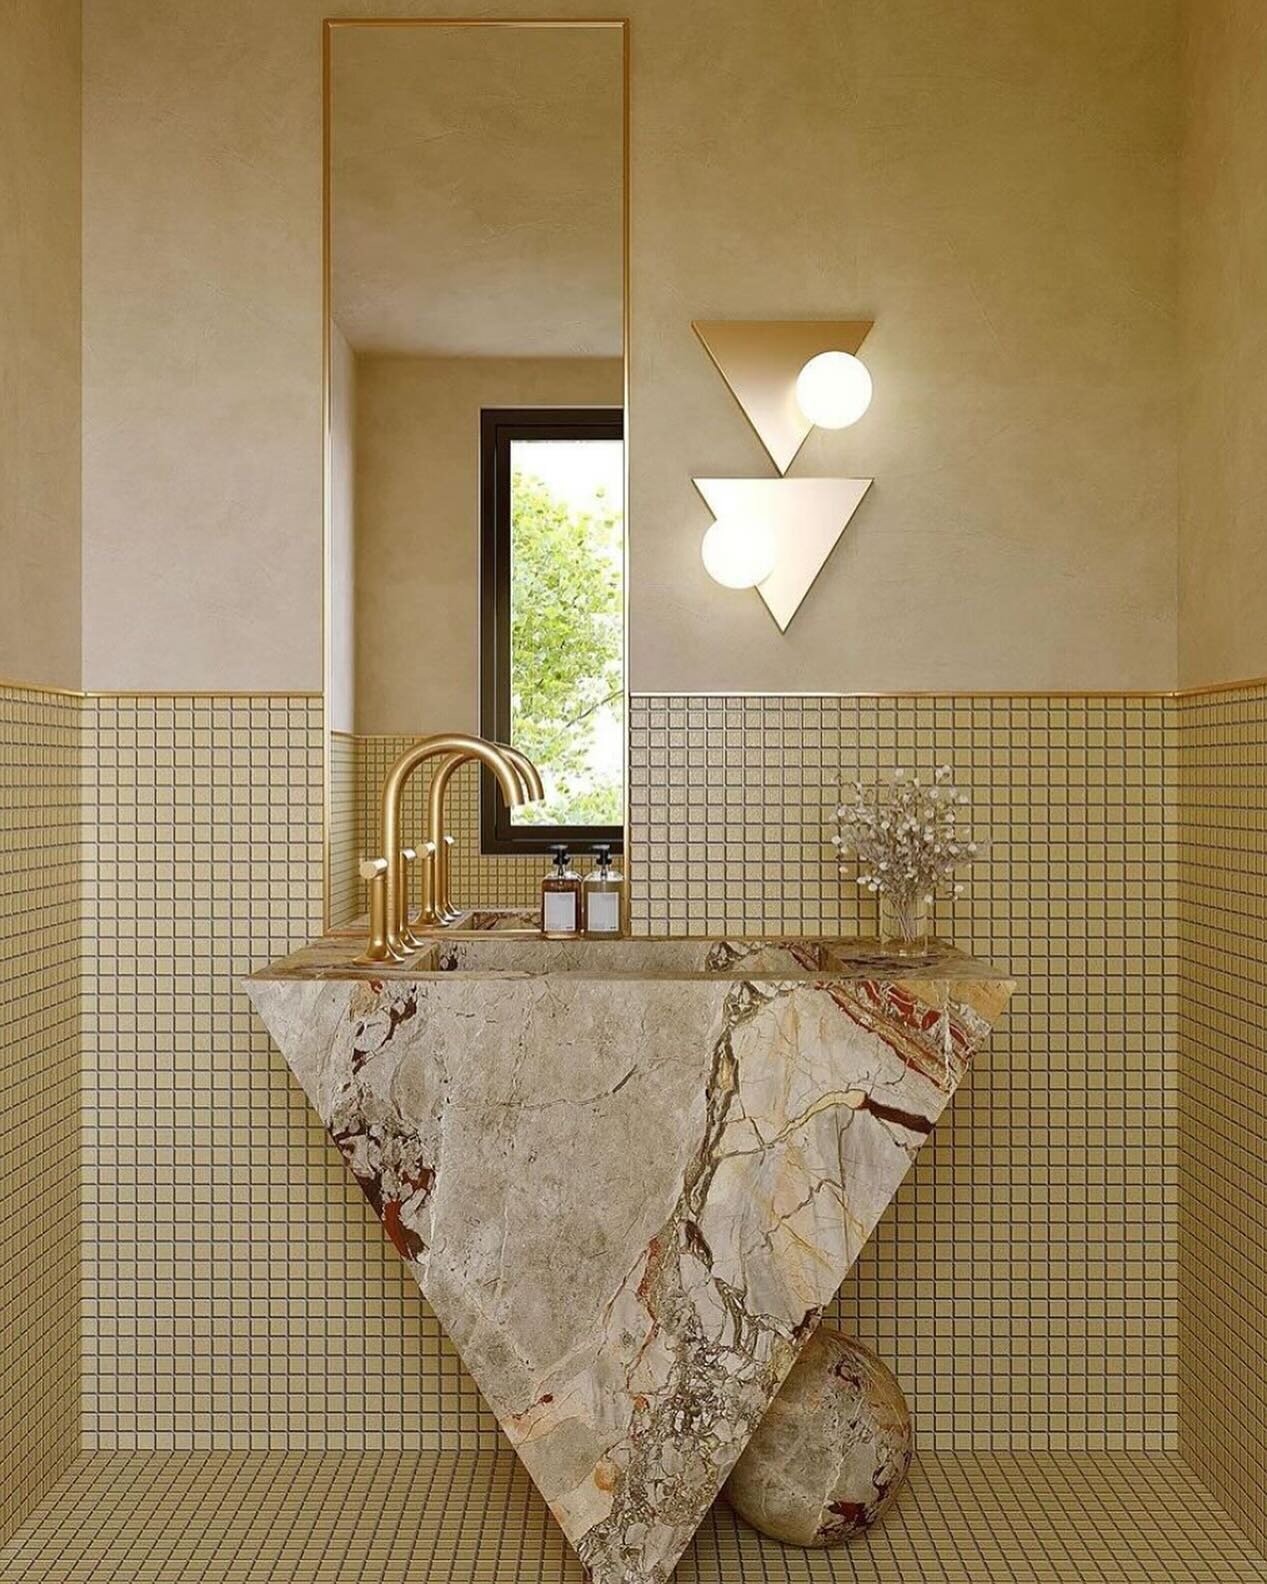 This monochromatic champagne gold bathroom is a masterpiece of impeccable style. From the geometric triangular marble sink base to the marble sphere at the bottom, every detail exudes sophistication. The triangle sconces with globe lights add a touch